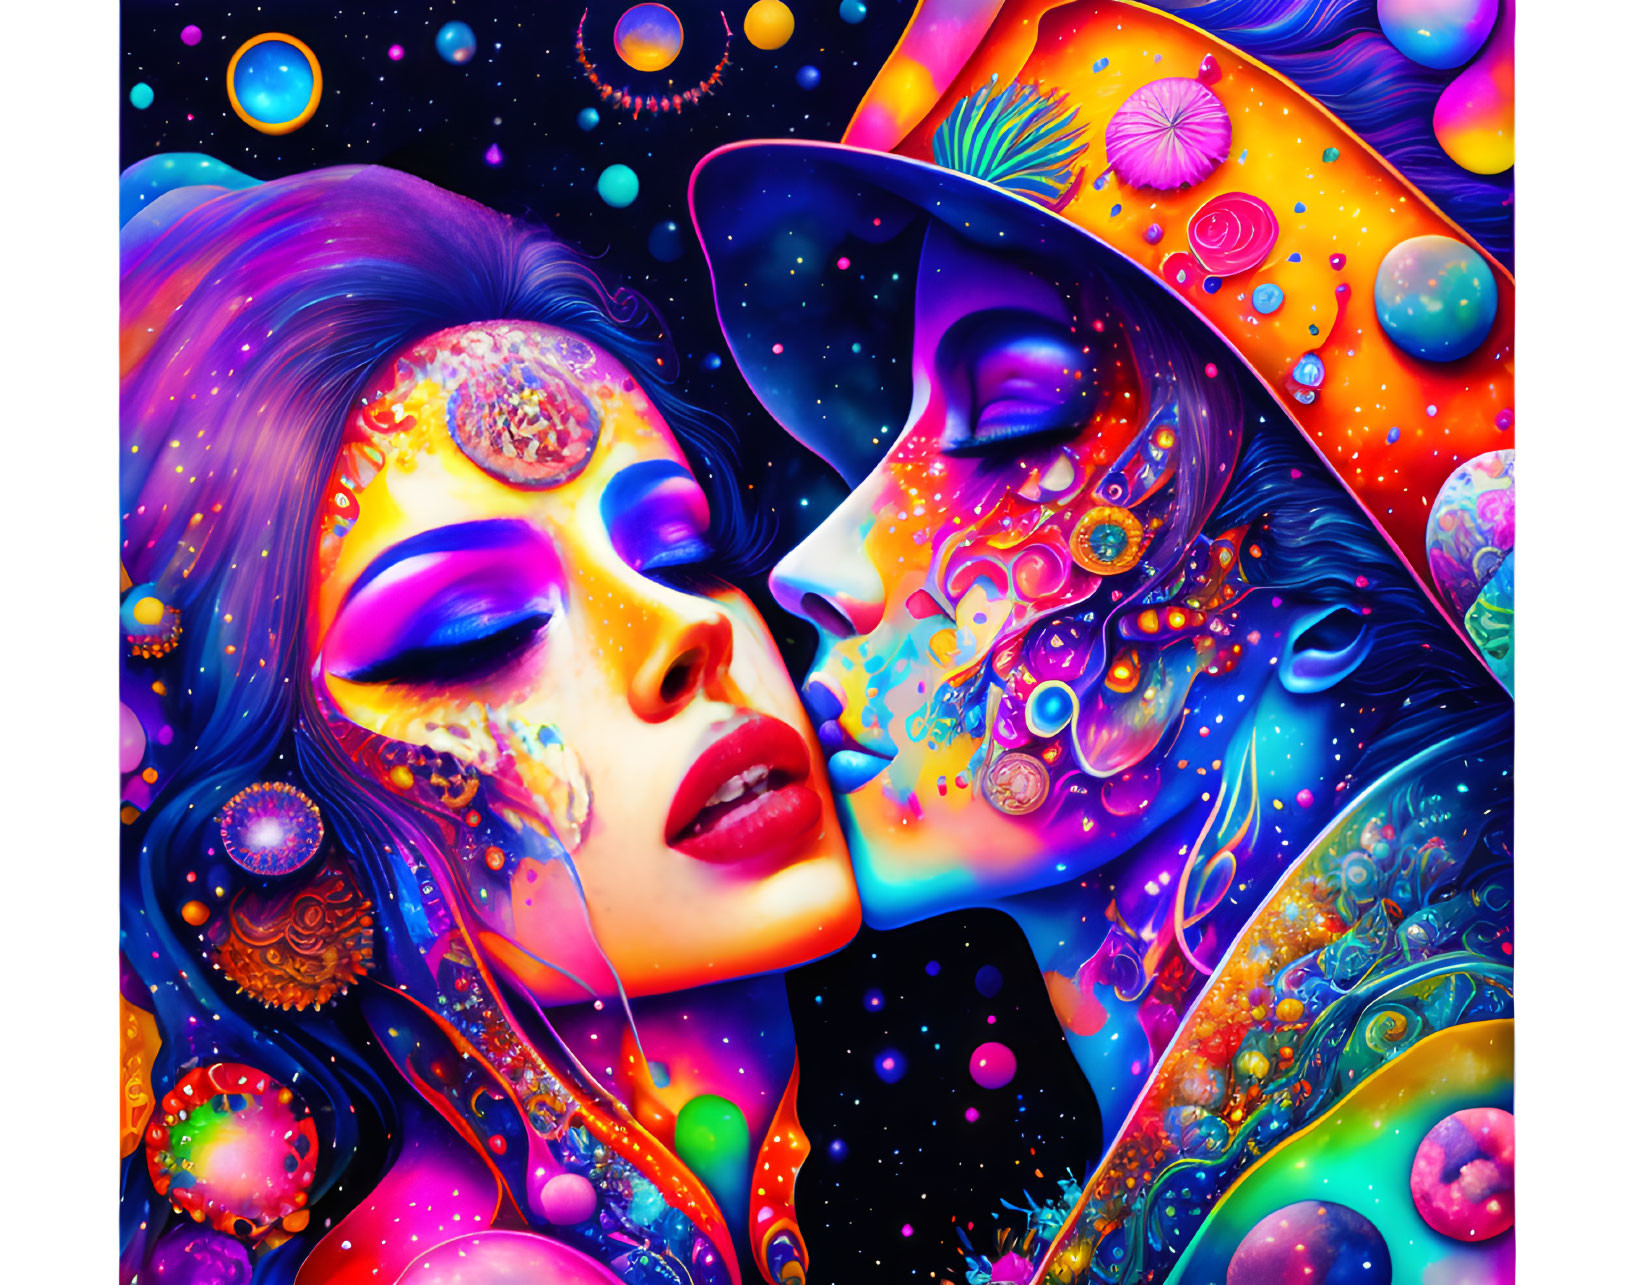 Intricately painted faces against vibrant cosmic background